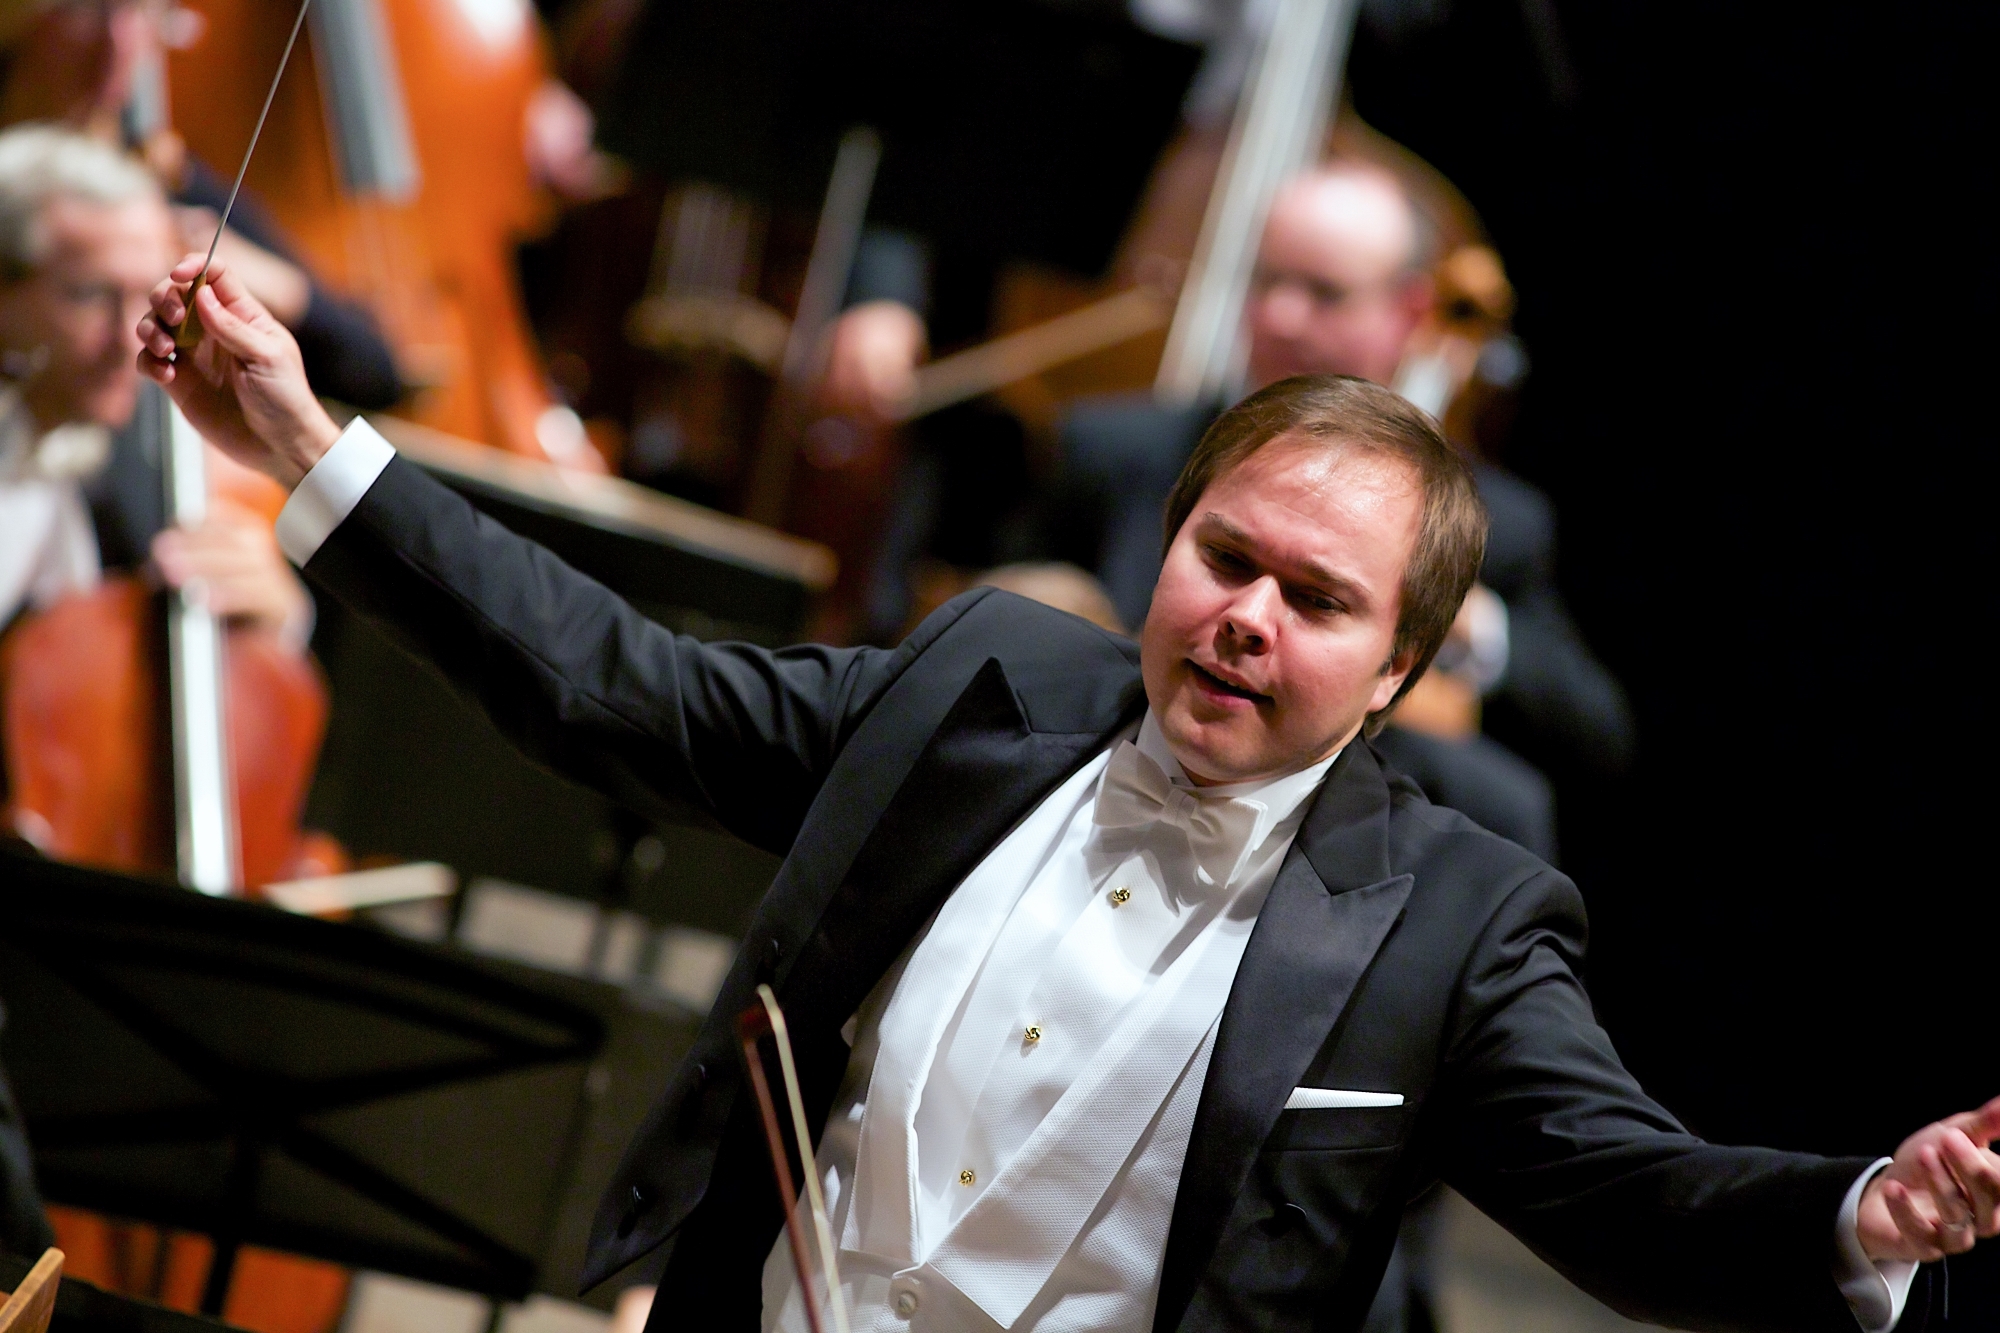 Review: Grand Rapids Symphony closed out the season with power and hope